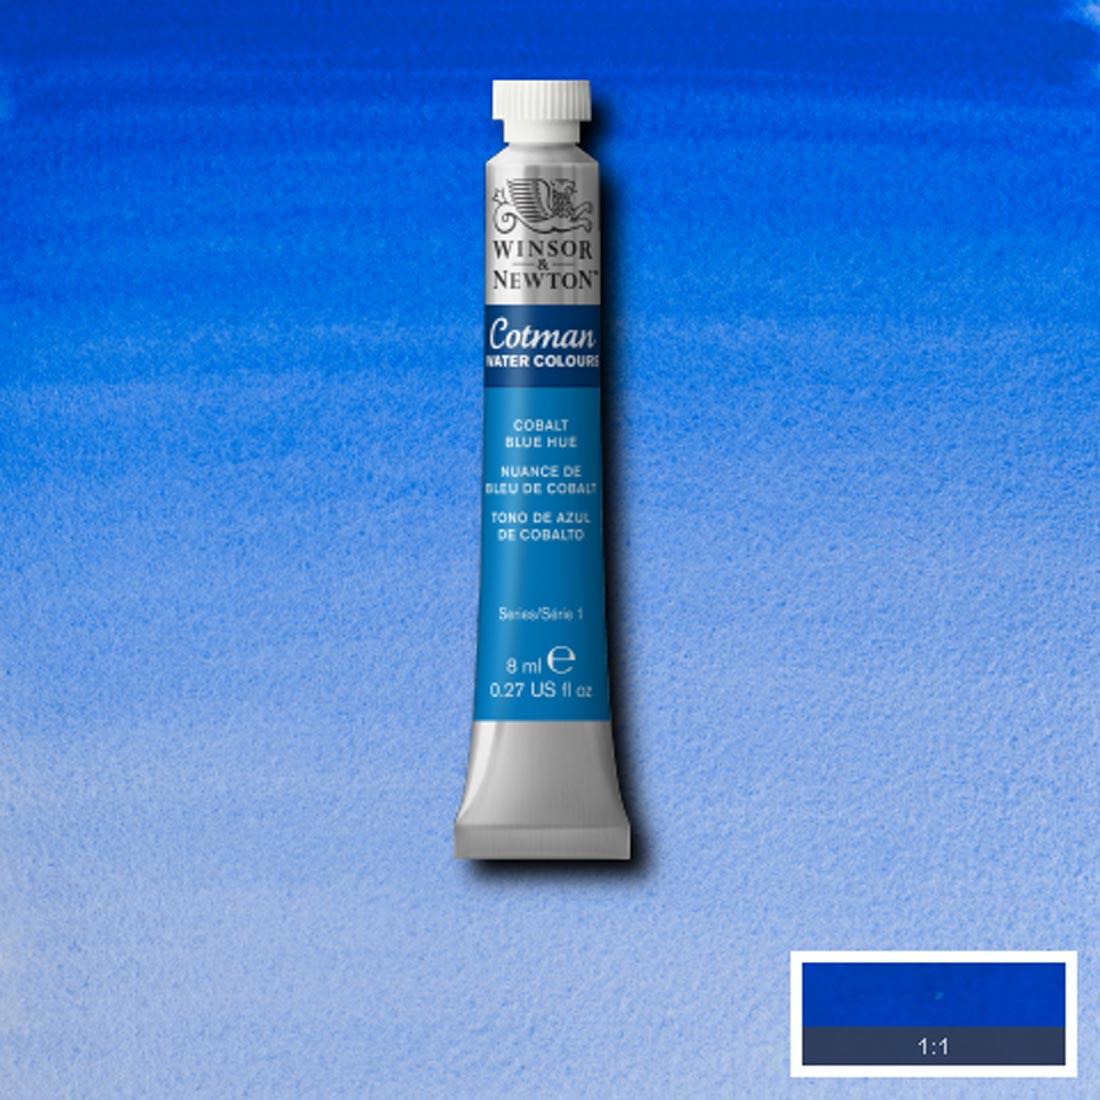 Tube of Cobalt Blue Hue Winsor and Newton Cotman Water Colour with a paint swatch for the background